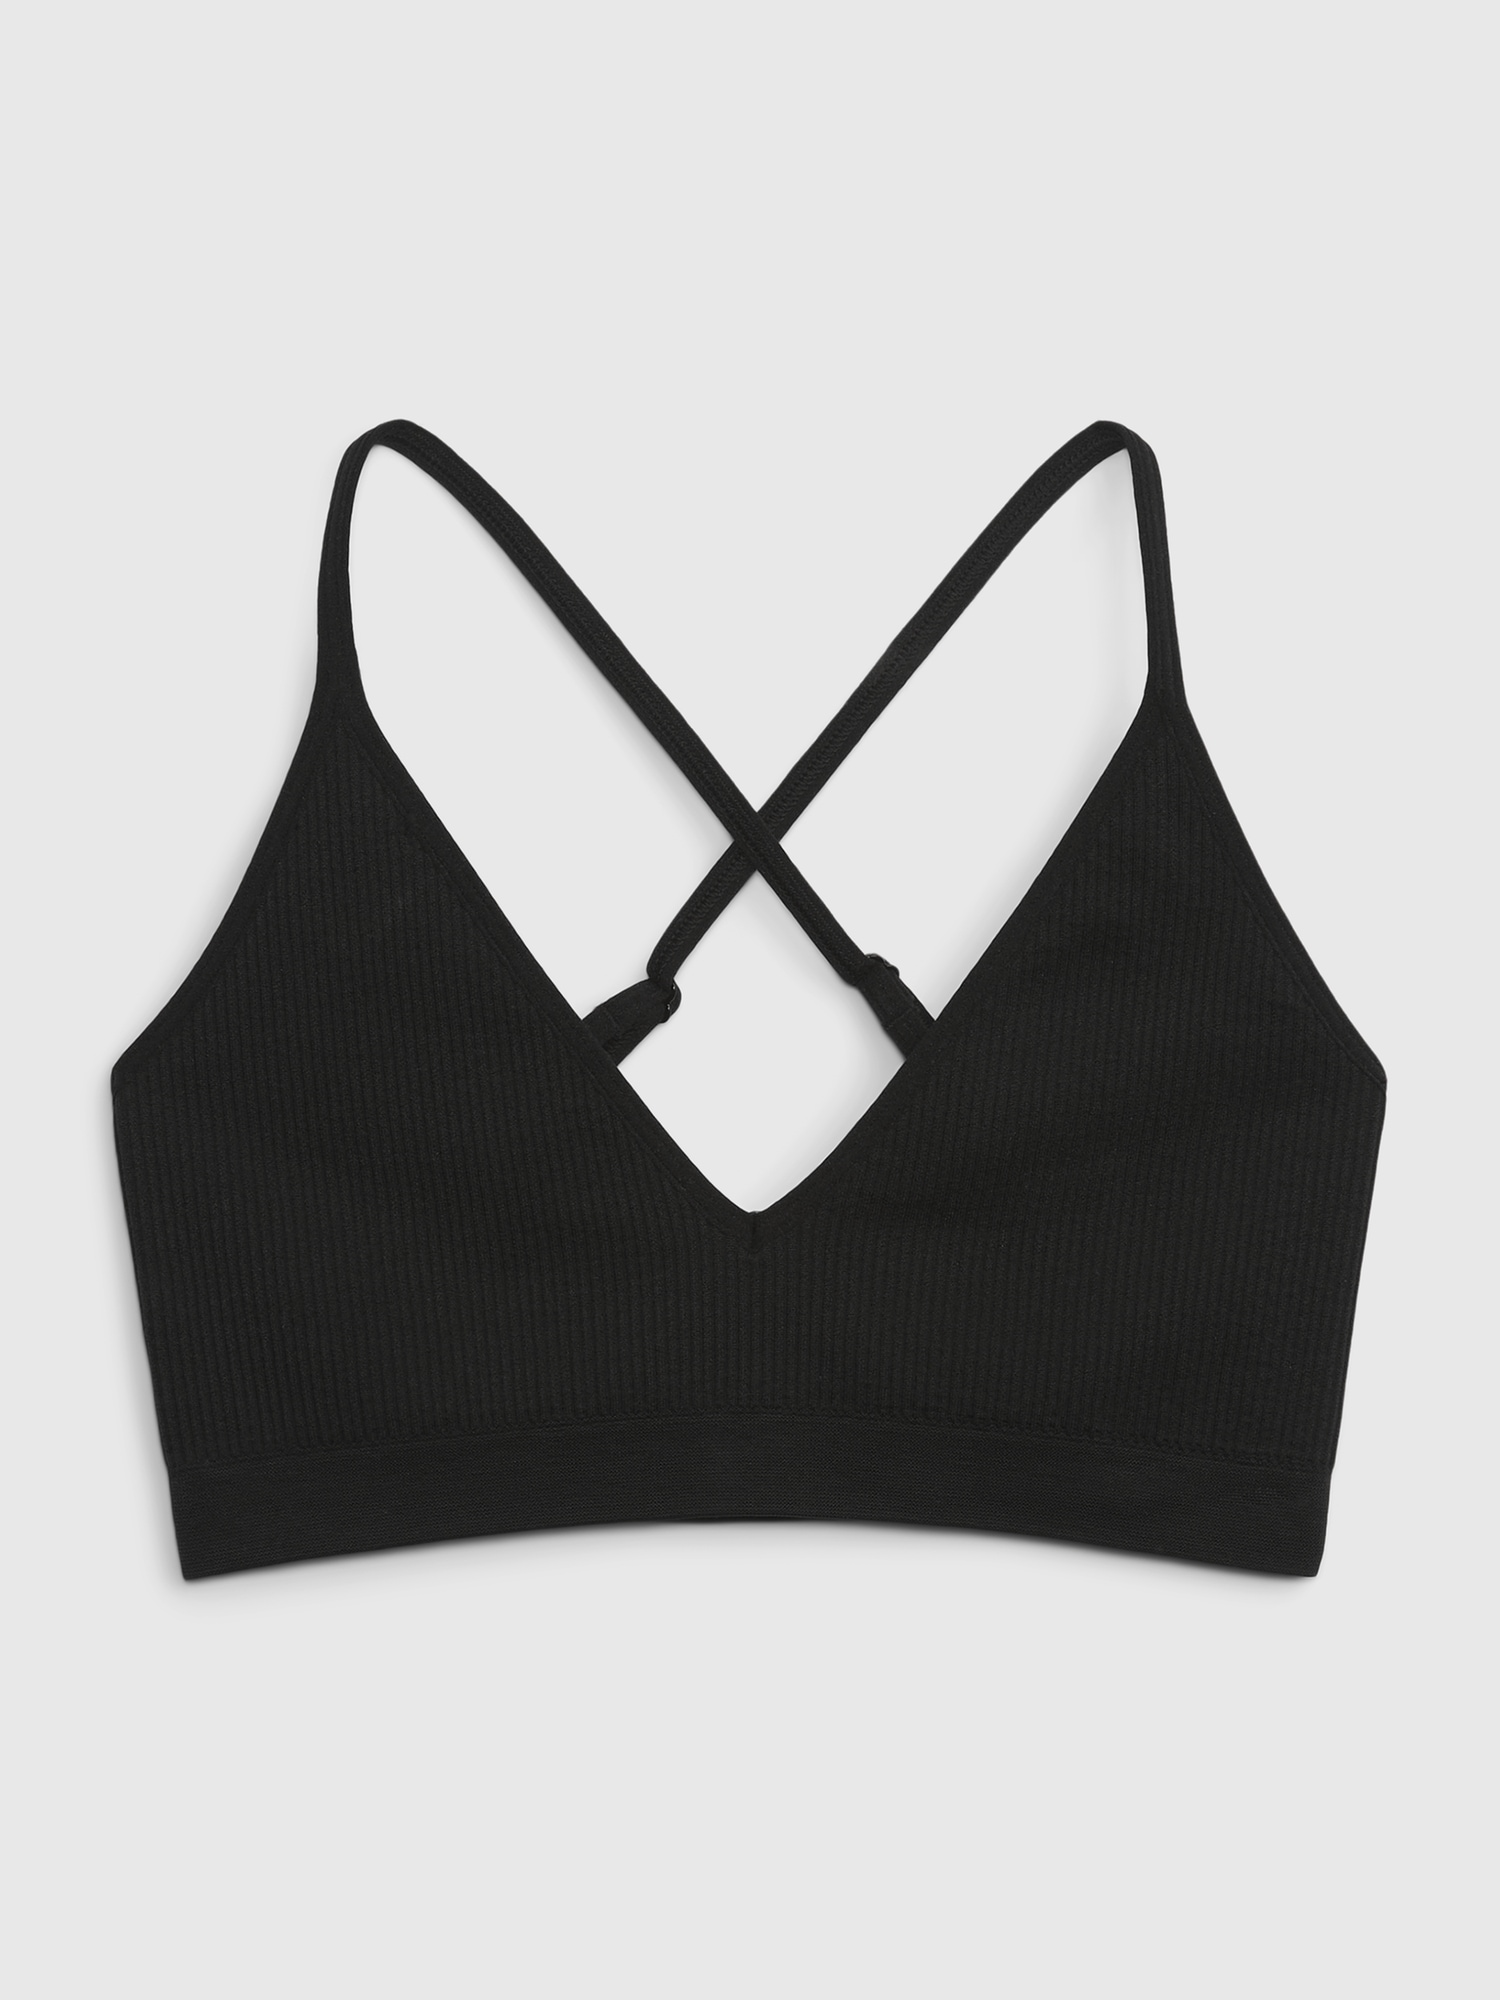 Ribbed Knit Triangle Bralette Black | The Best Bralette for Small Busts